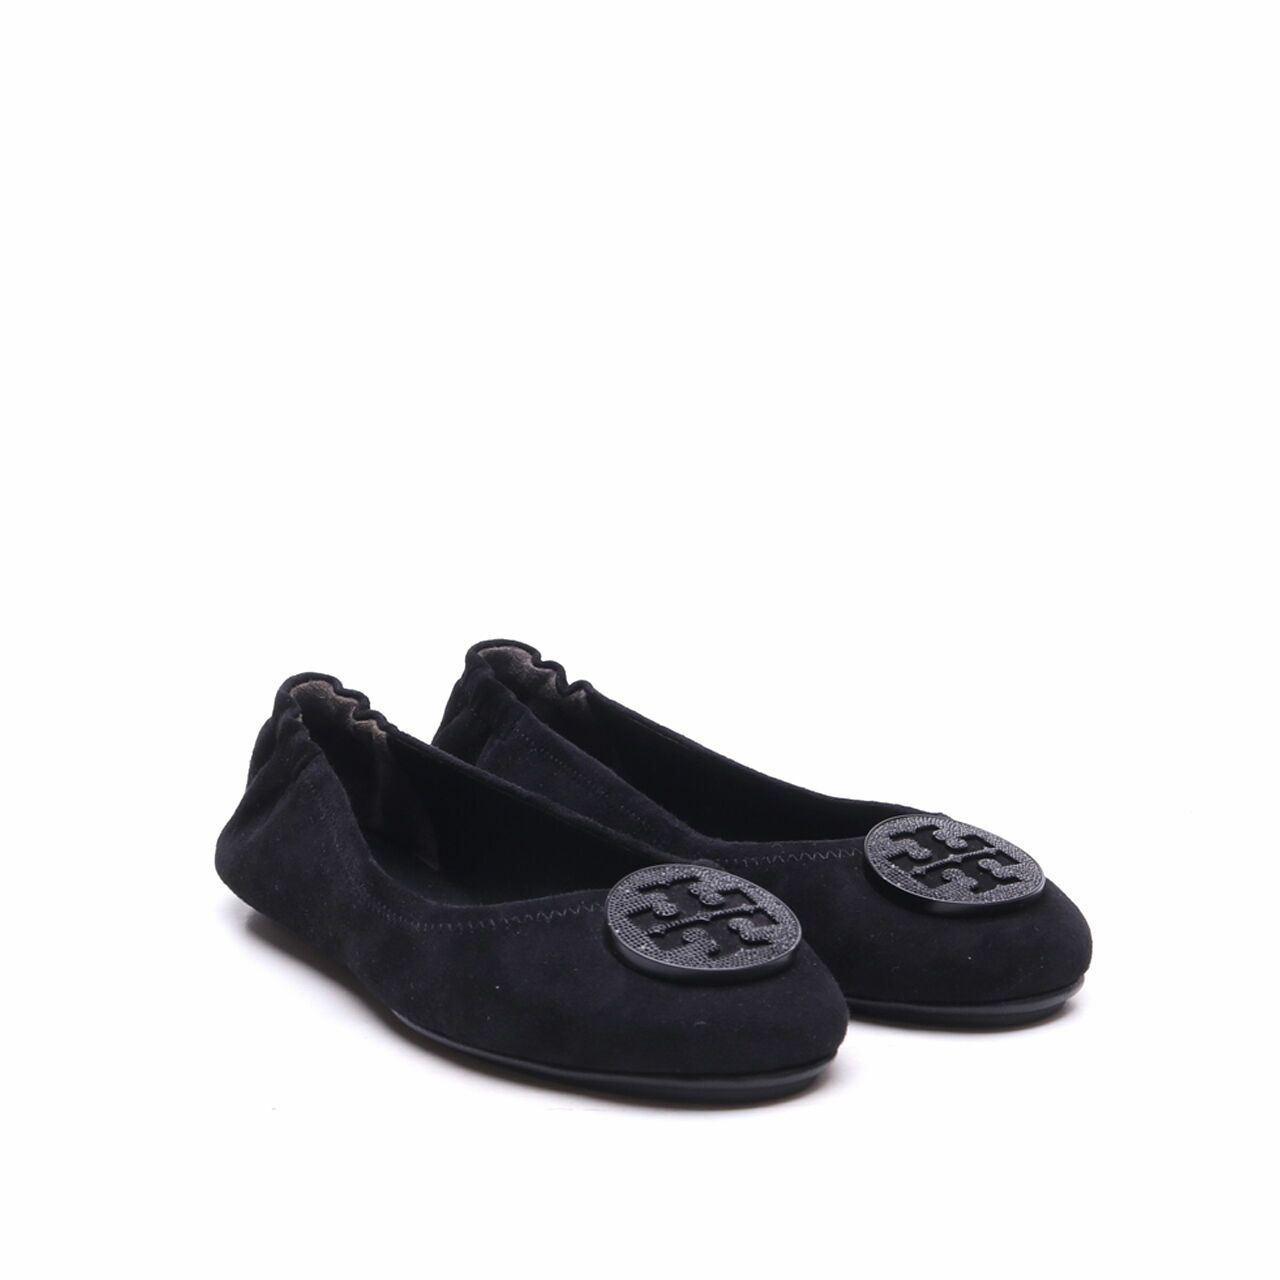 Tory Burch Minnie Travel Ballet with Pave Logo Perfect Black Flats Shoes